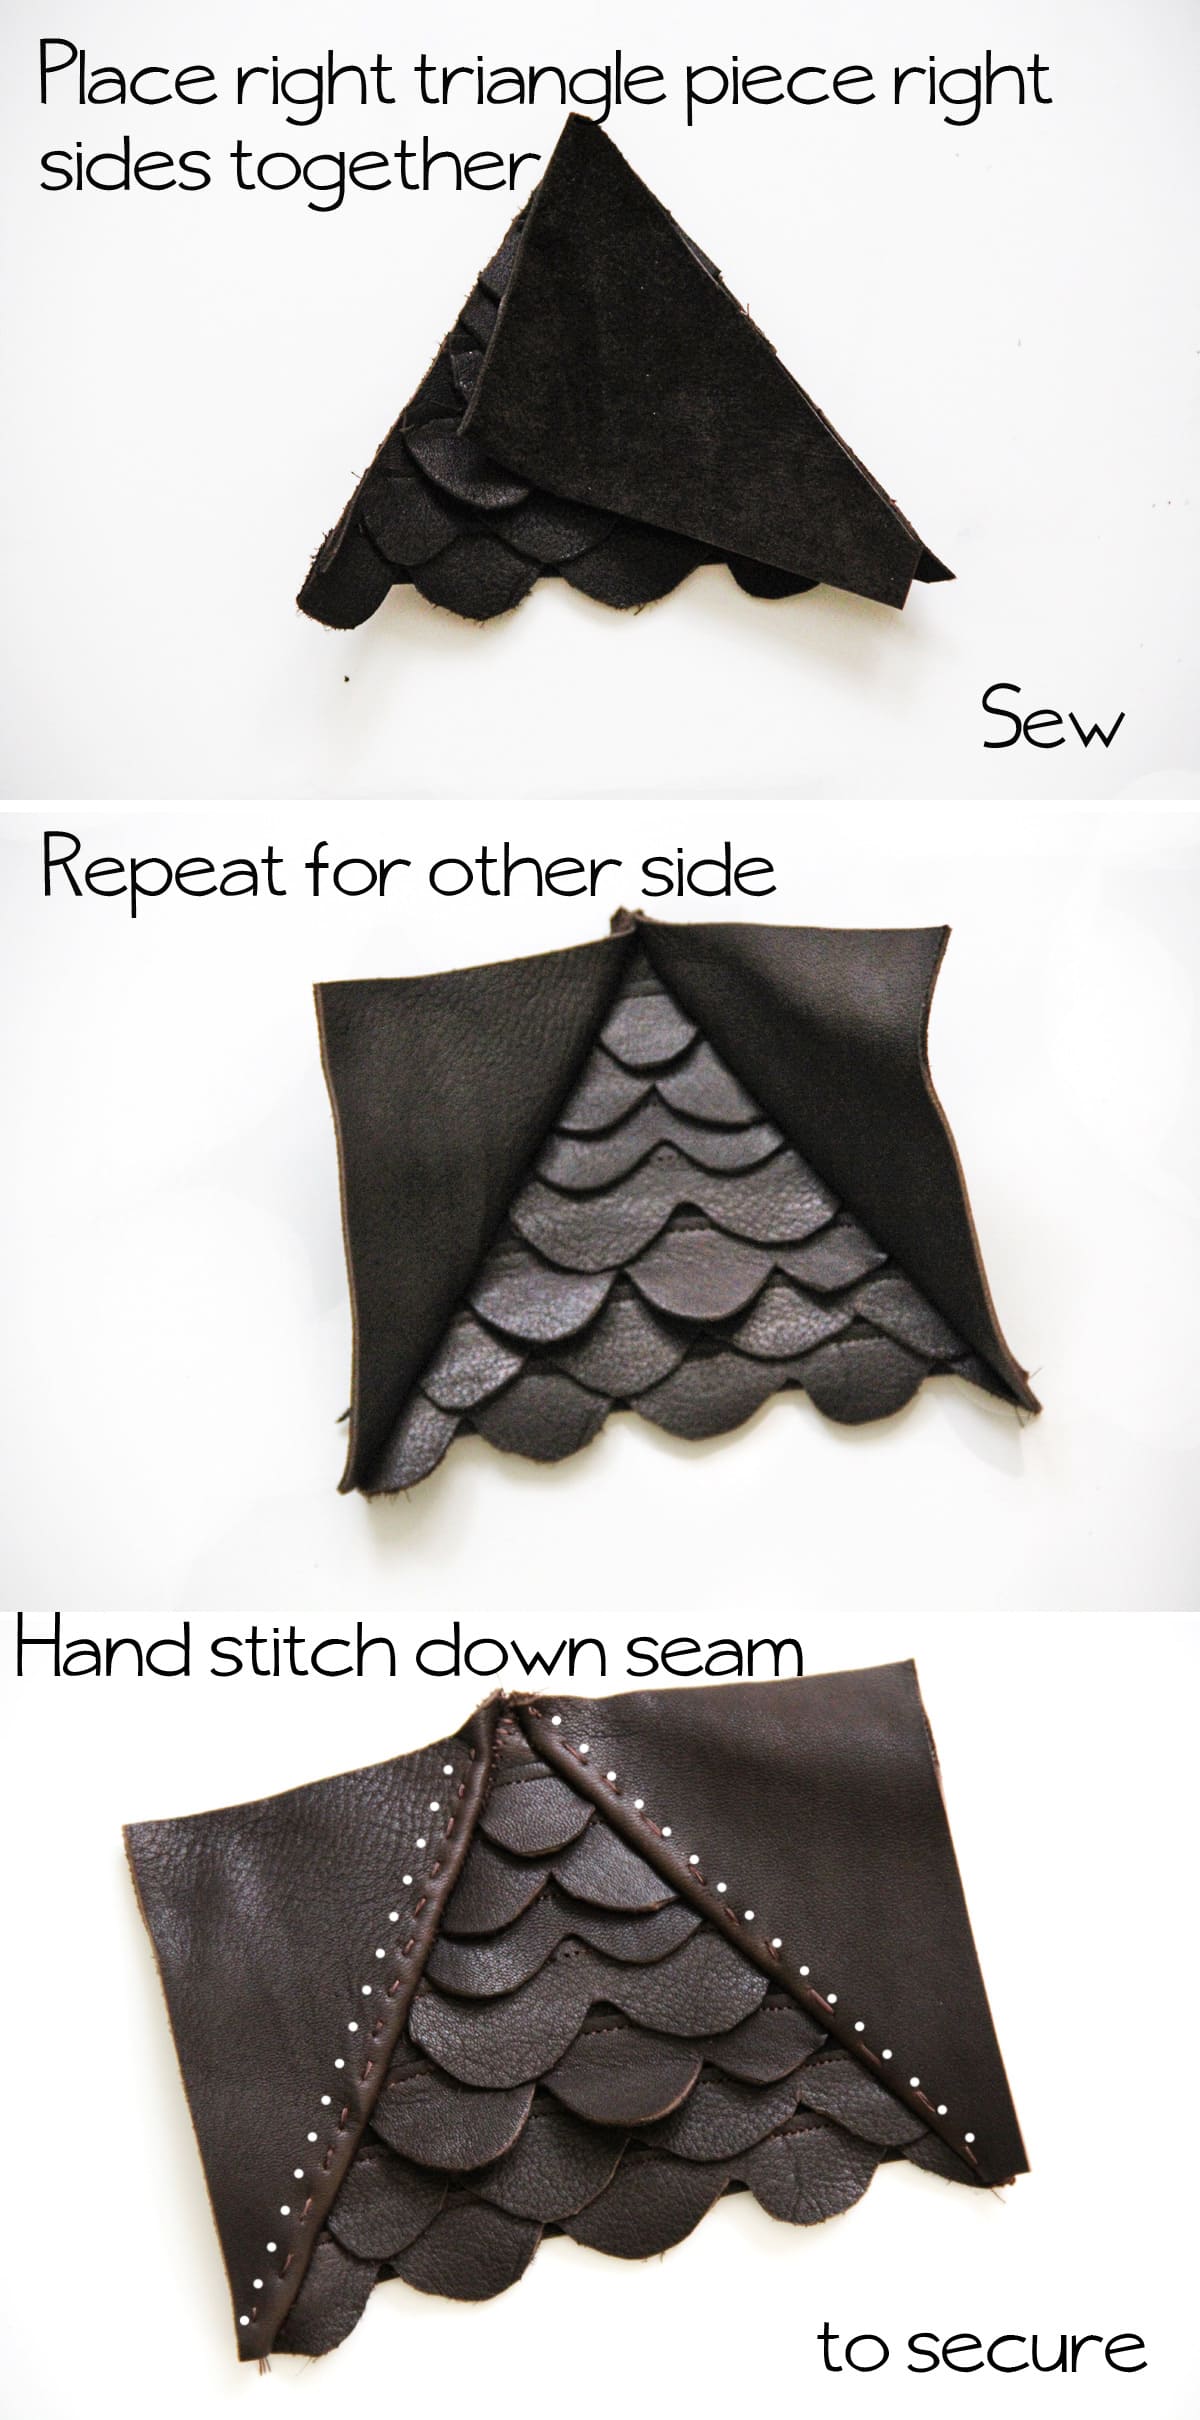 DIY Scalloped Leather Clutch Tutorial